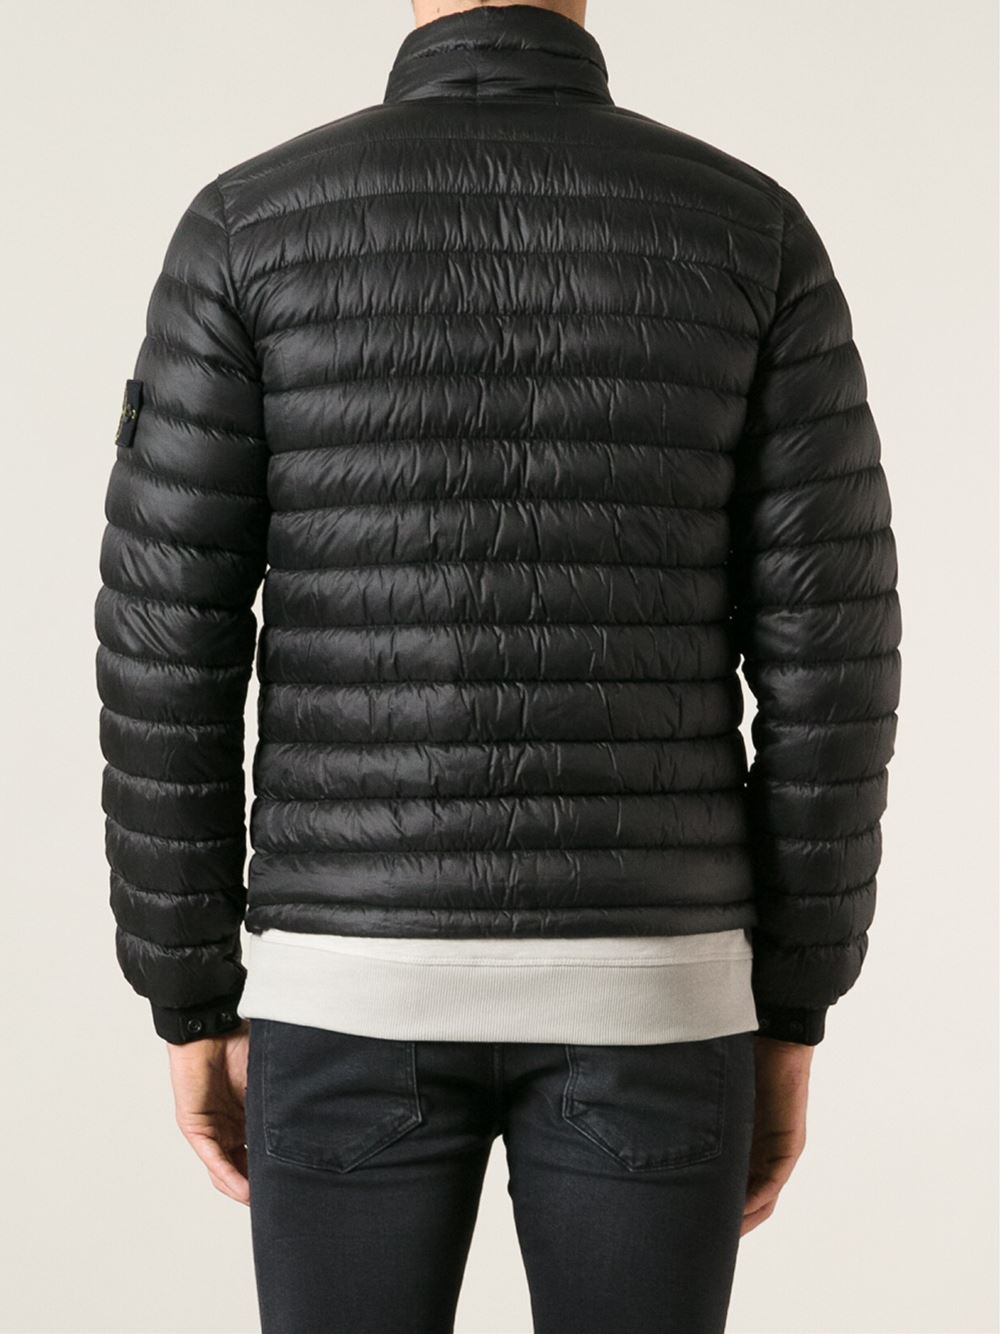 Stone Island Padded Jacket in Black for Men - Lyst